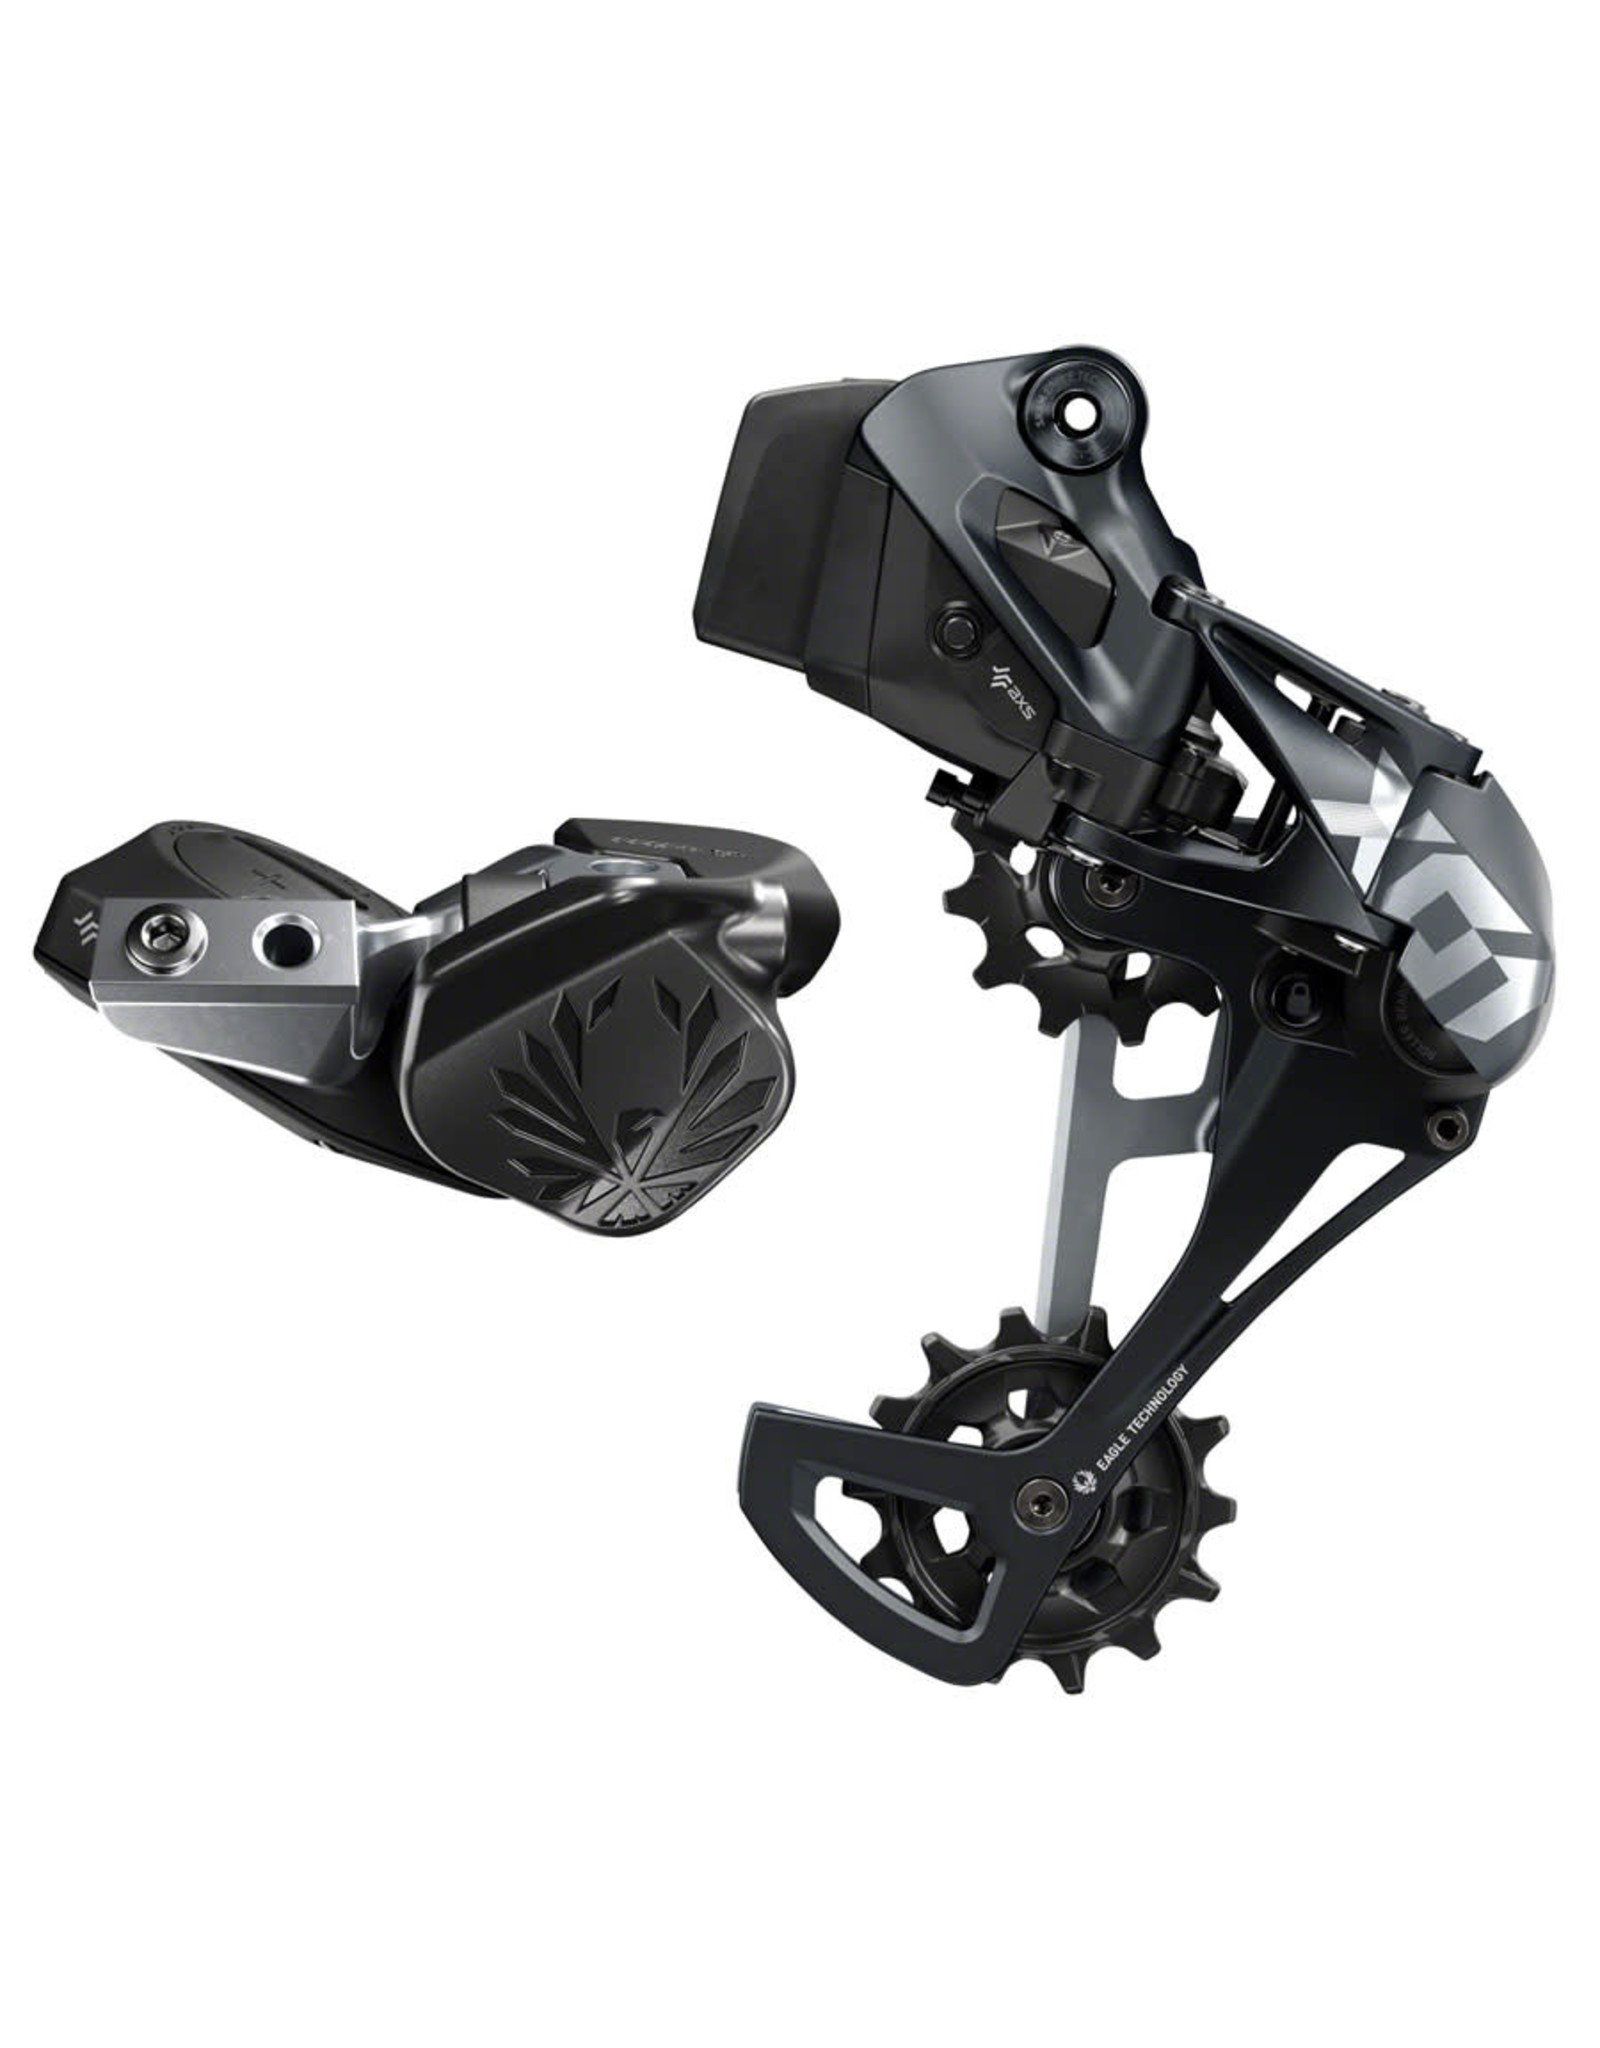 SRAM SRAM X01 Eagle AXS Upgrade Kit - Rear Derailleur for 10-52t, Battery, Eagle AXS 2-Button Controller w/ Clamp, Charger/Cord, Lunar Black